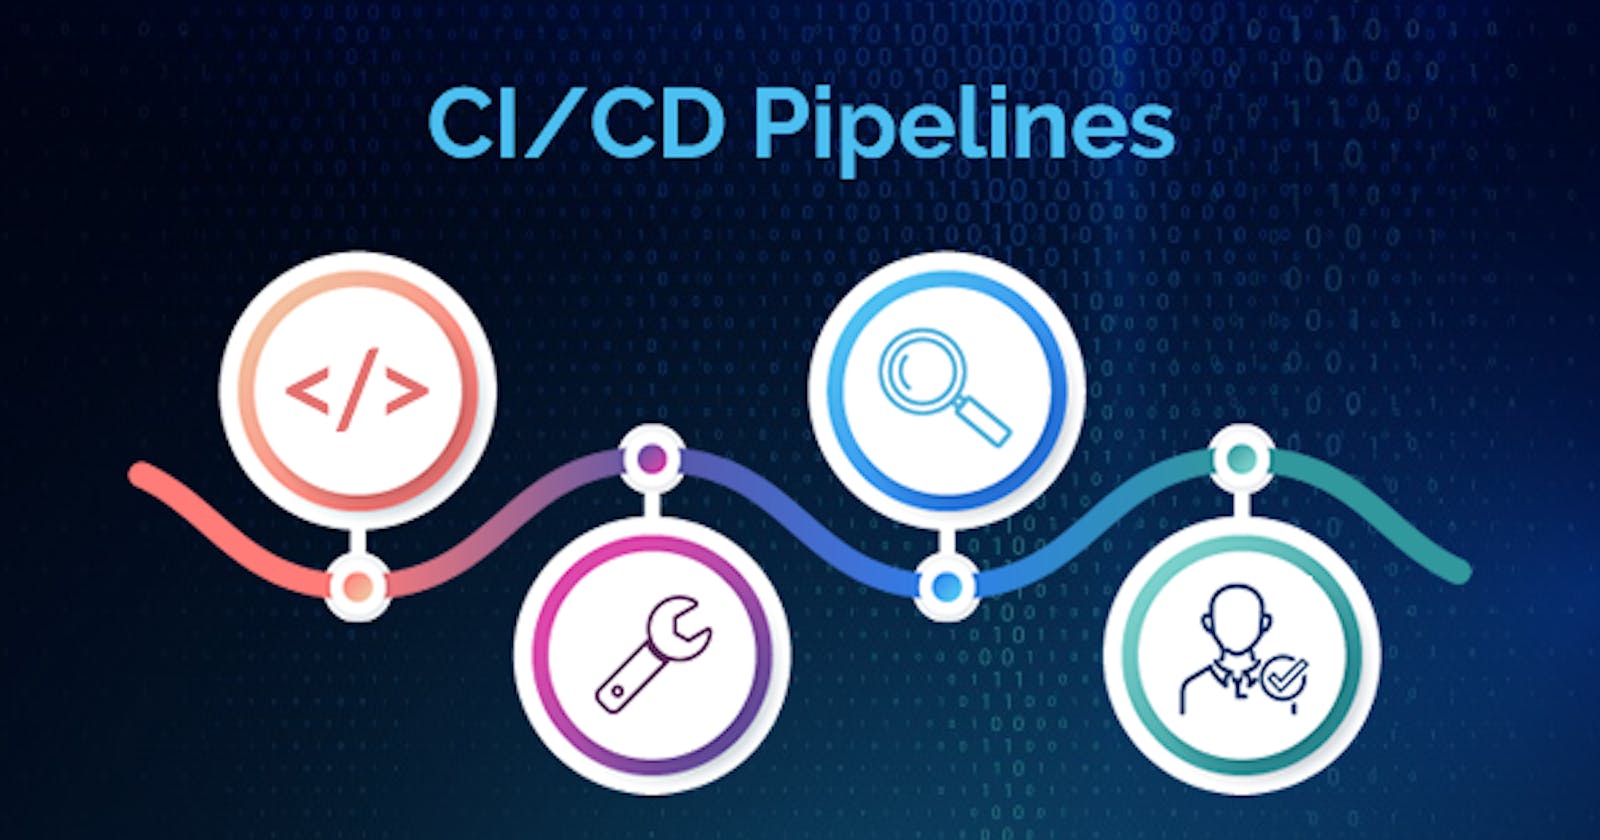 Continuous Integration And Delivery
(CI/CD) Pipeline